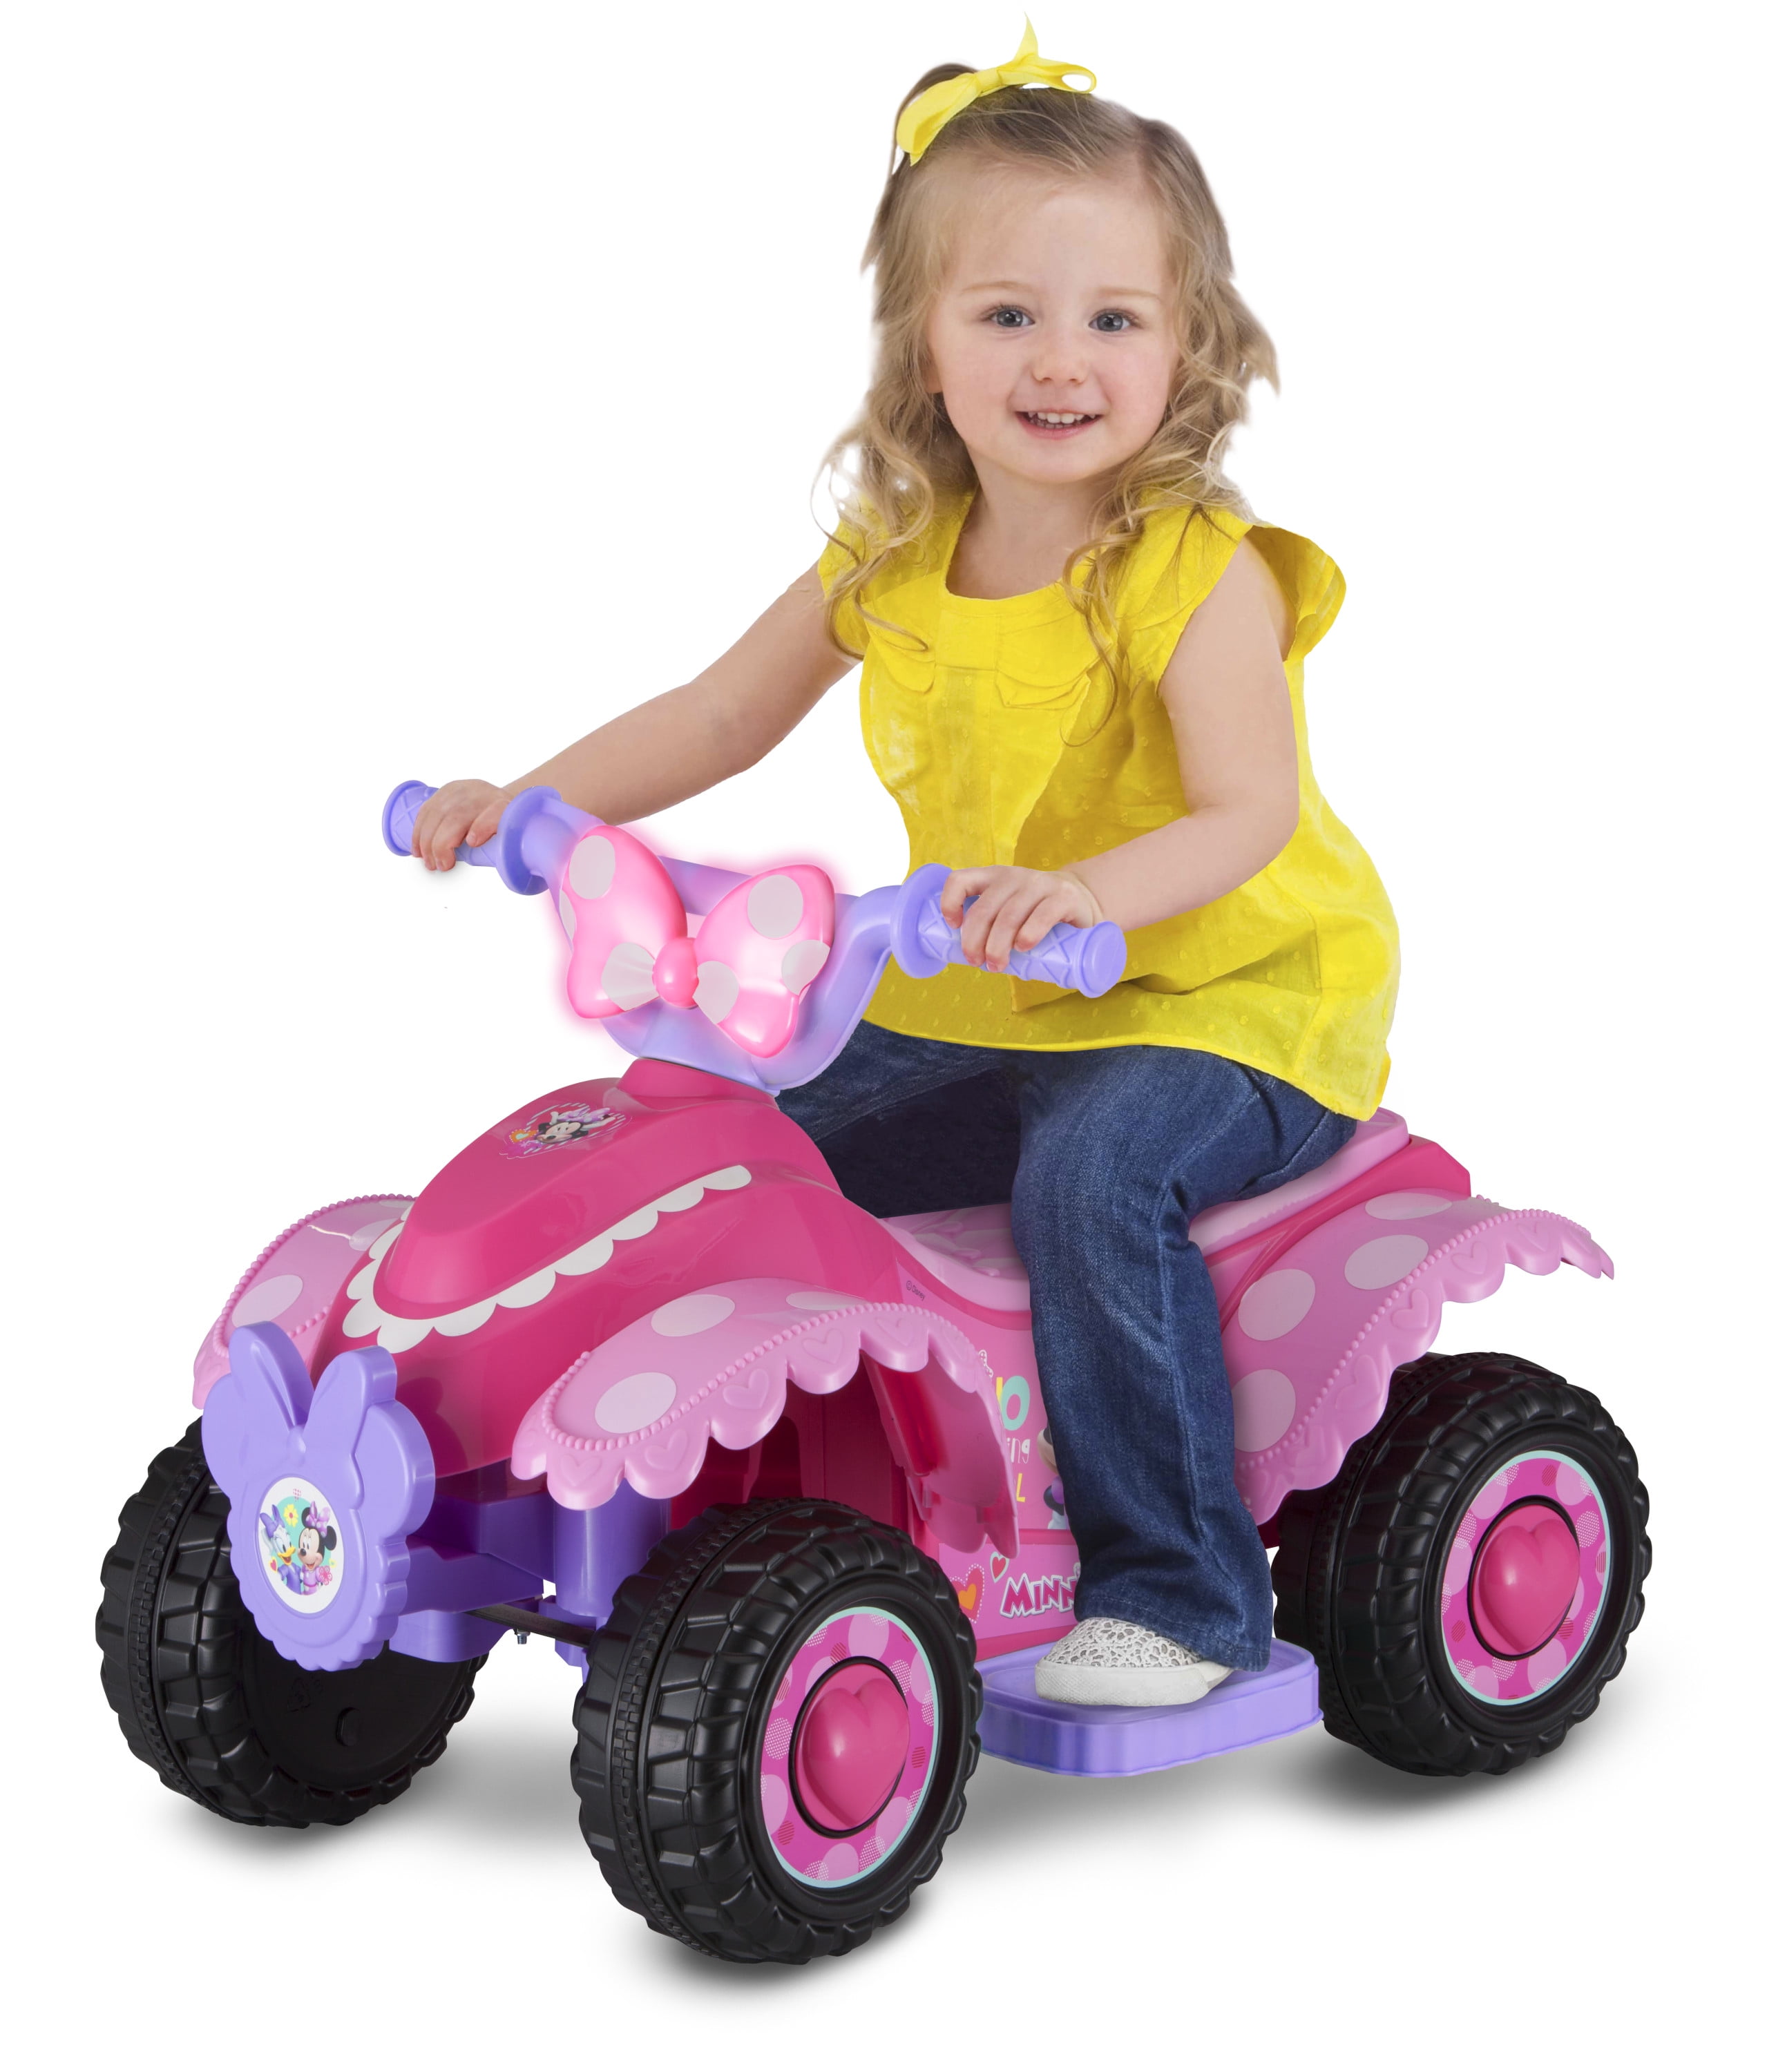 6-Volt Ride-On Toy KidTrax Disney's Minnie Mouse Hot Rod Toddler Quad 